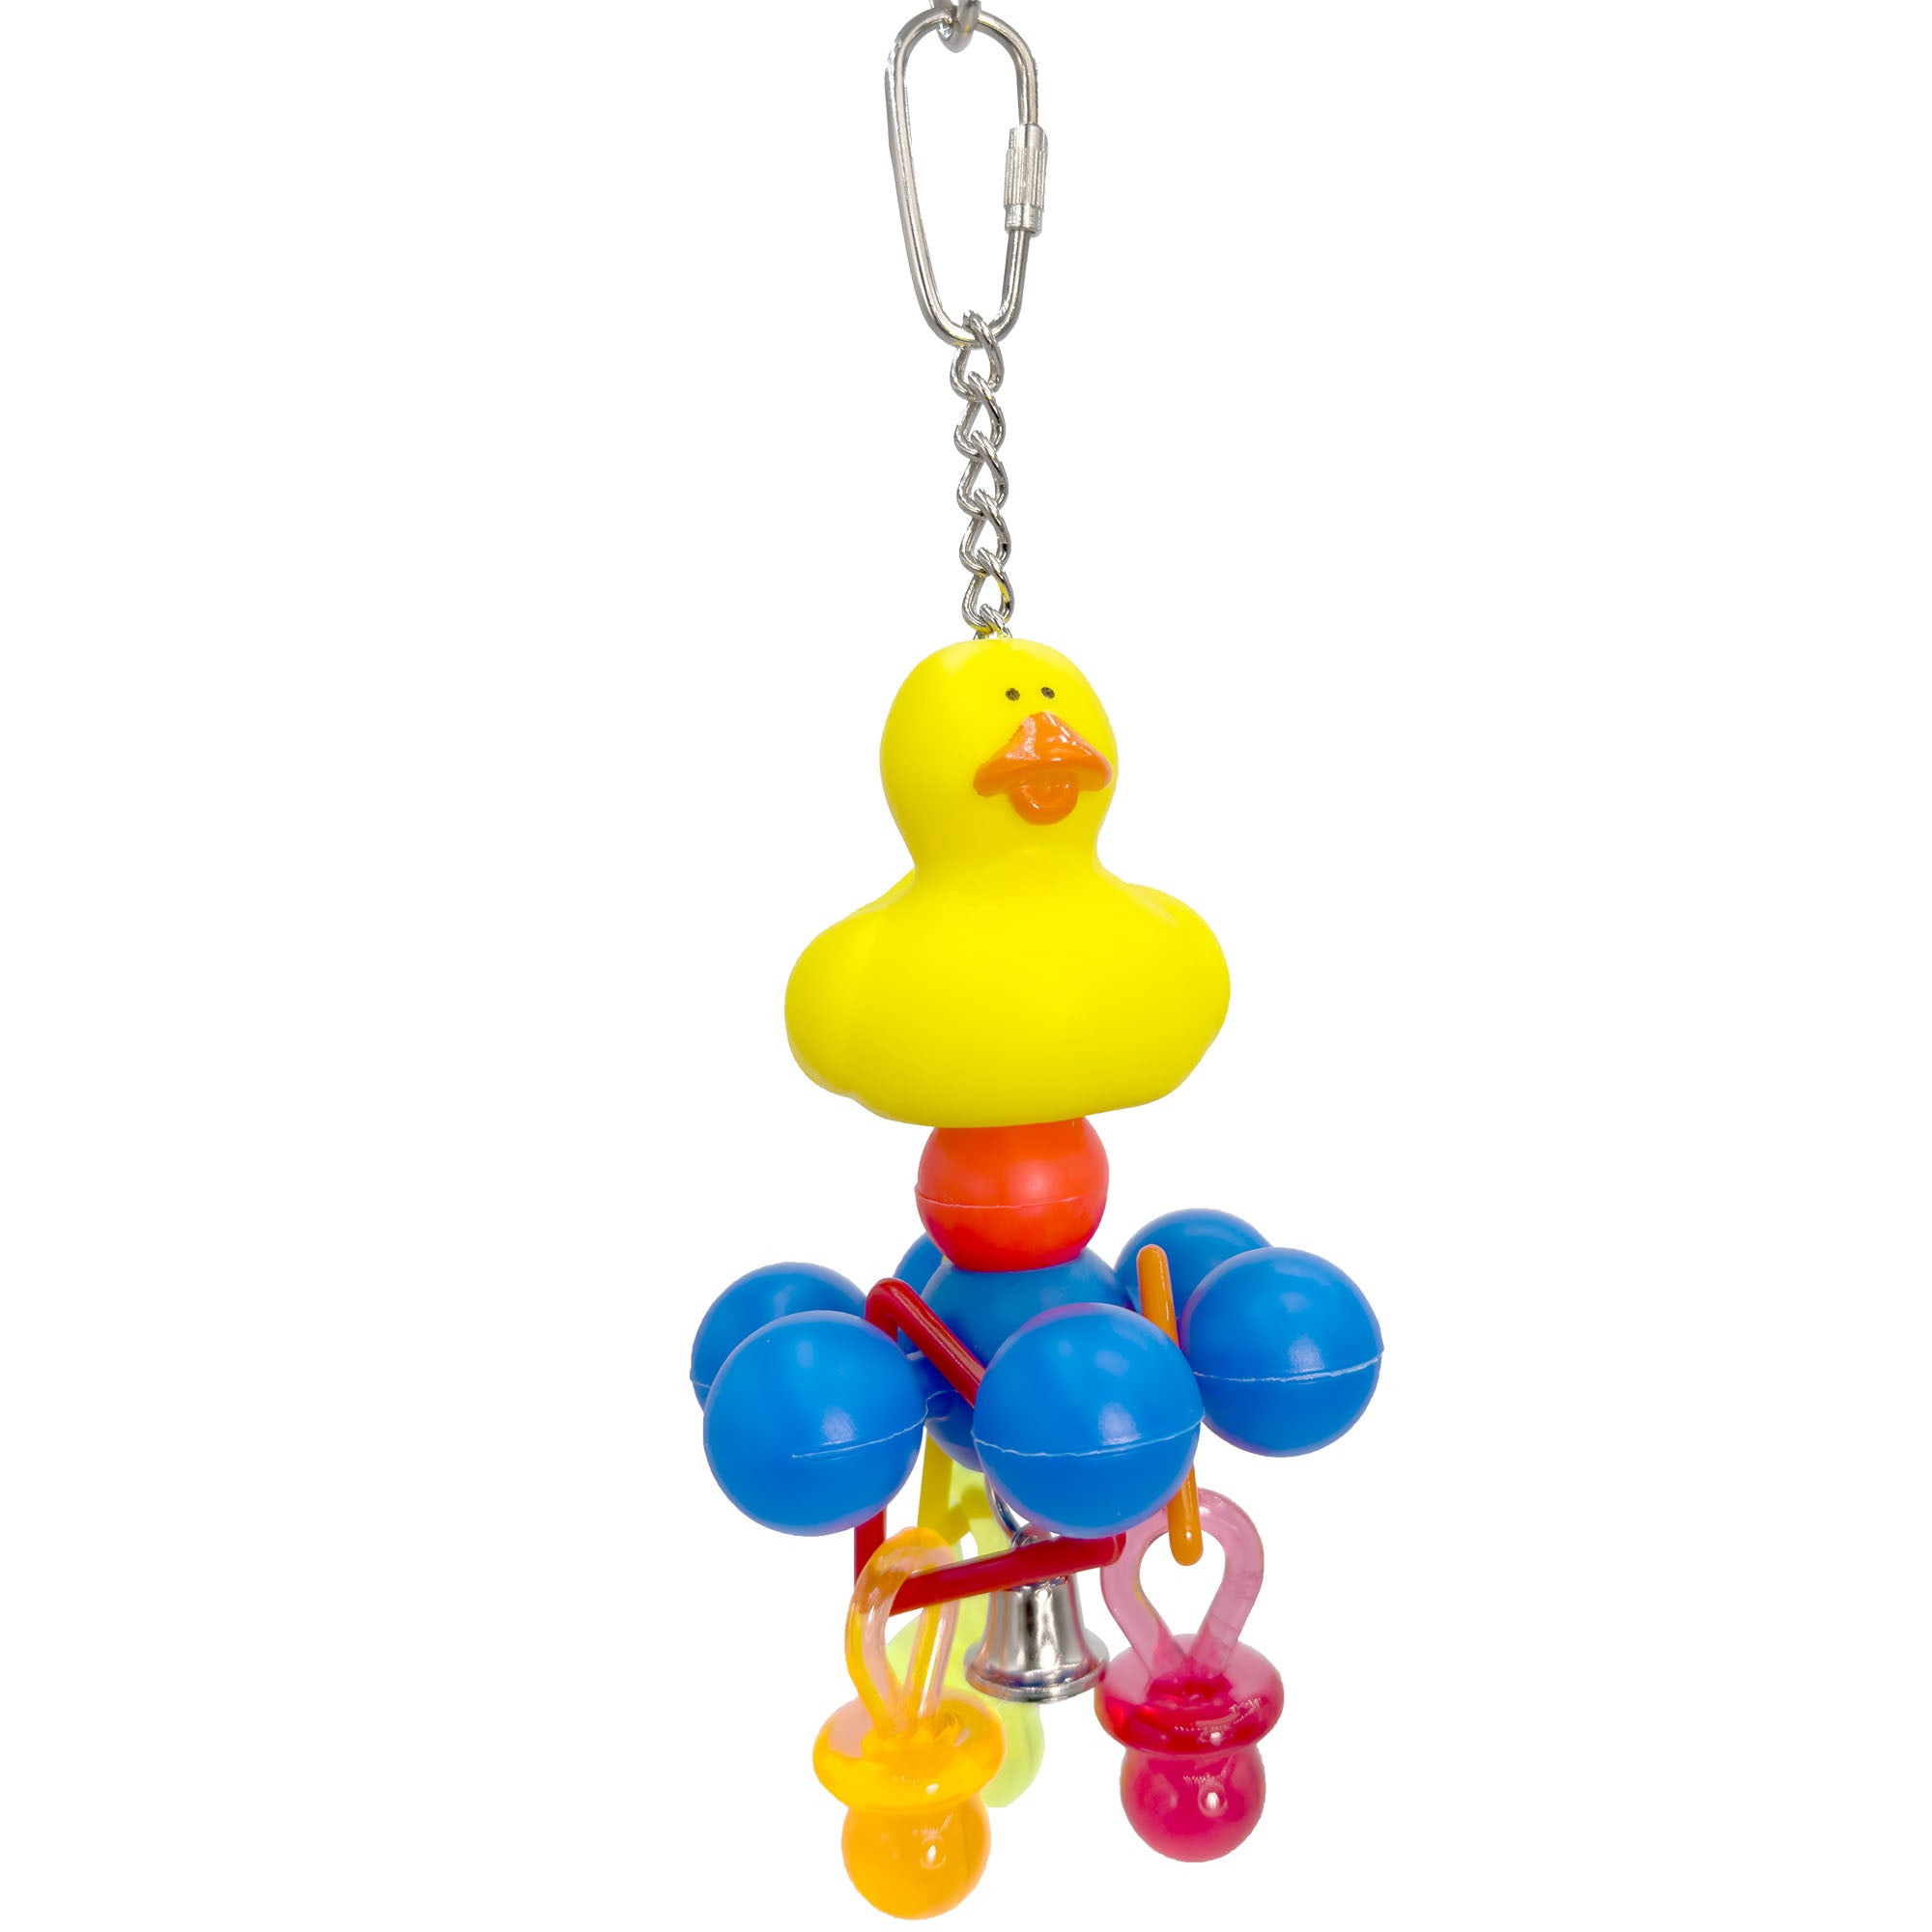 1119 UFO Ducky Quacker Colorful Interactive Handmade Small Pet Toy